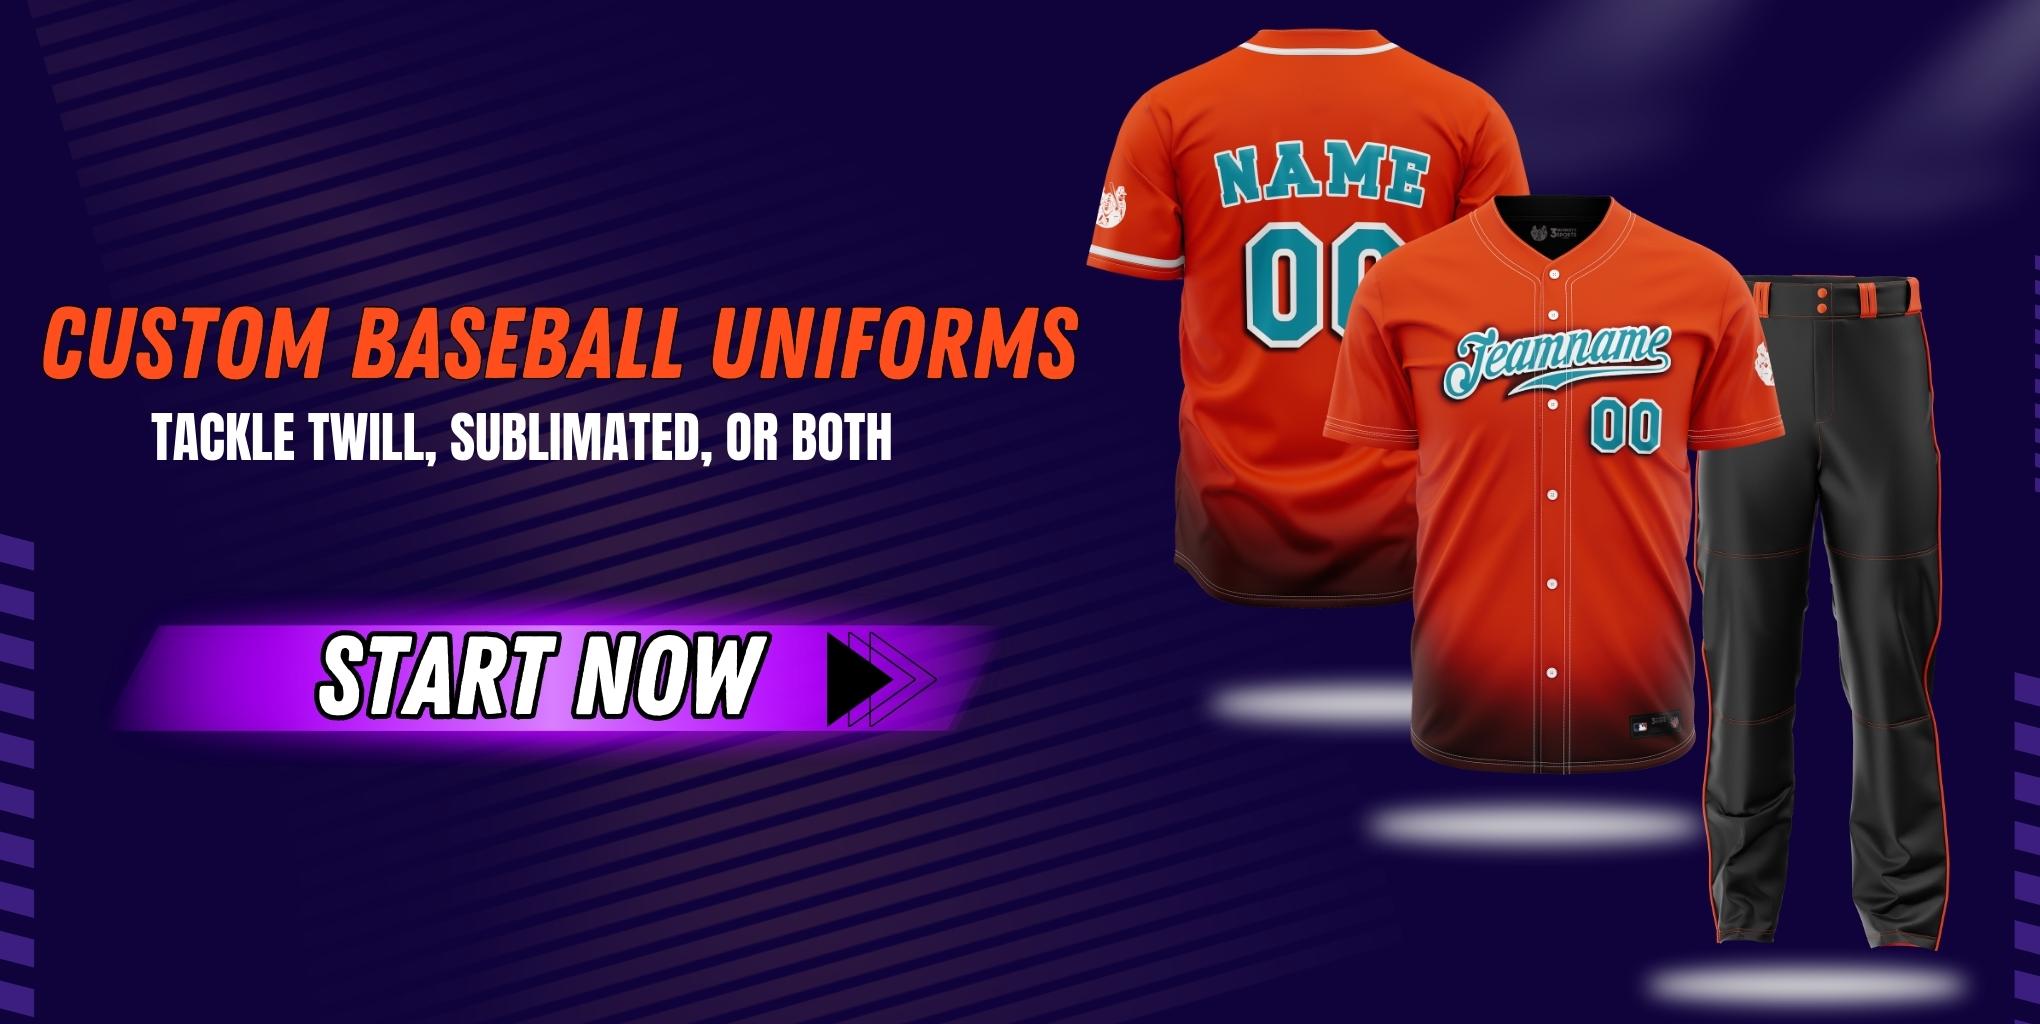 Custom Uniforms and Apparel for Sports